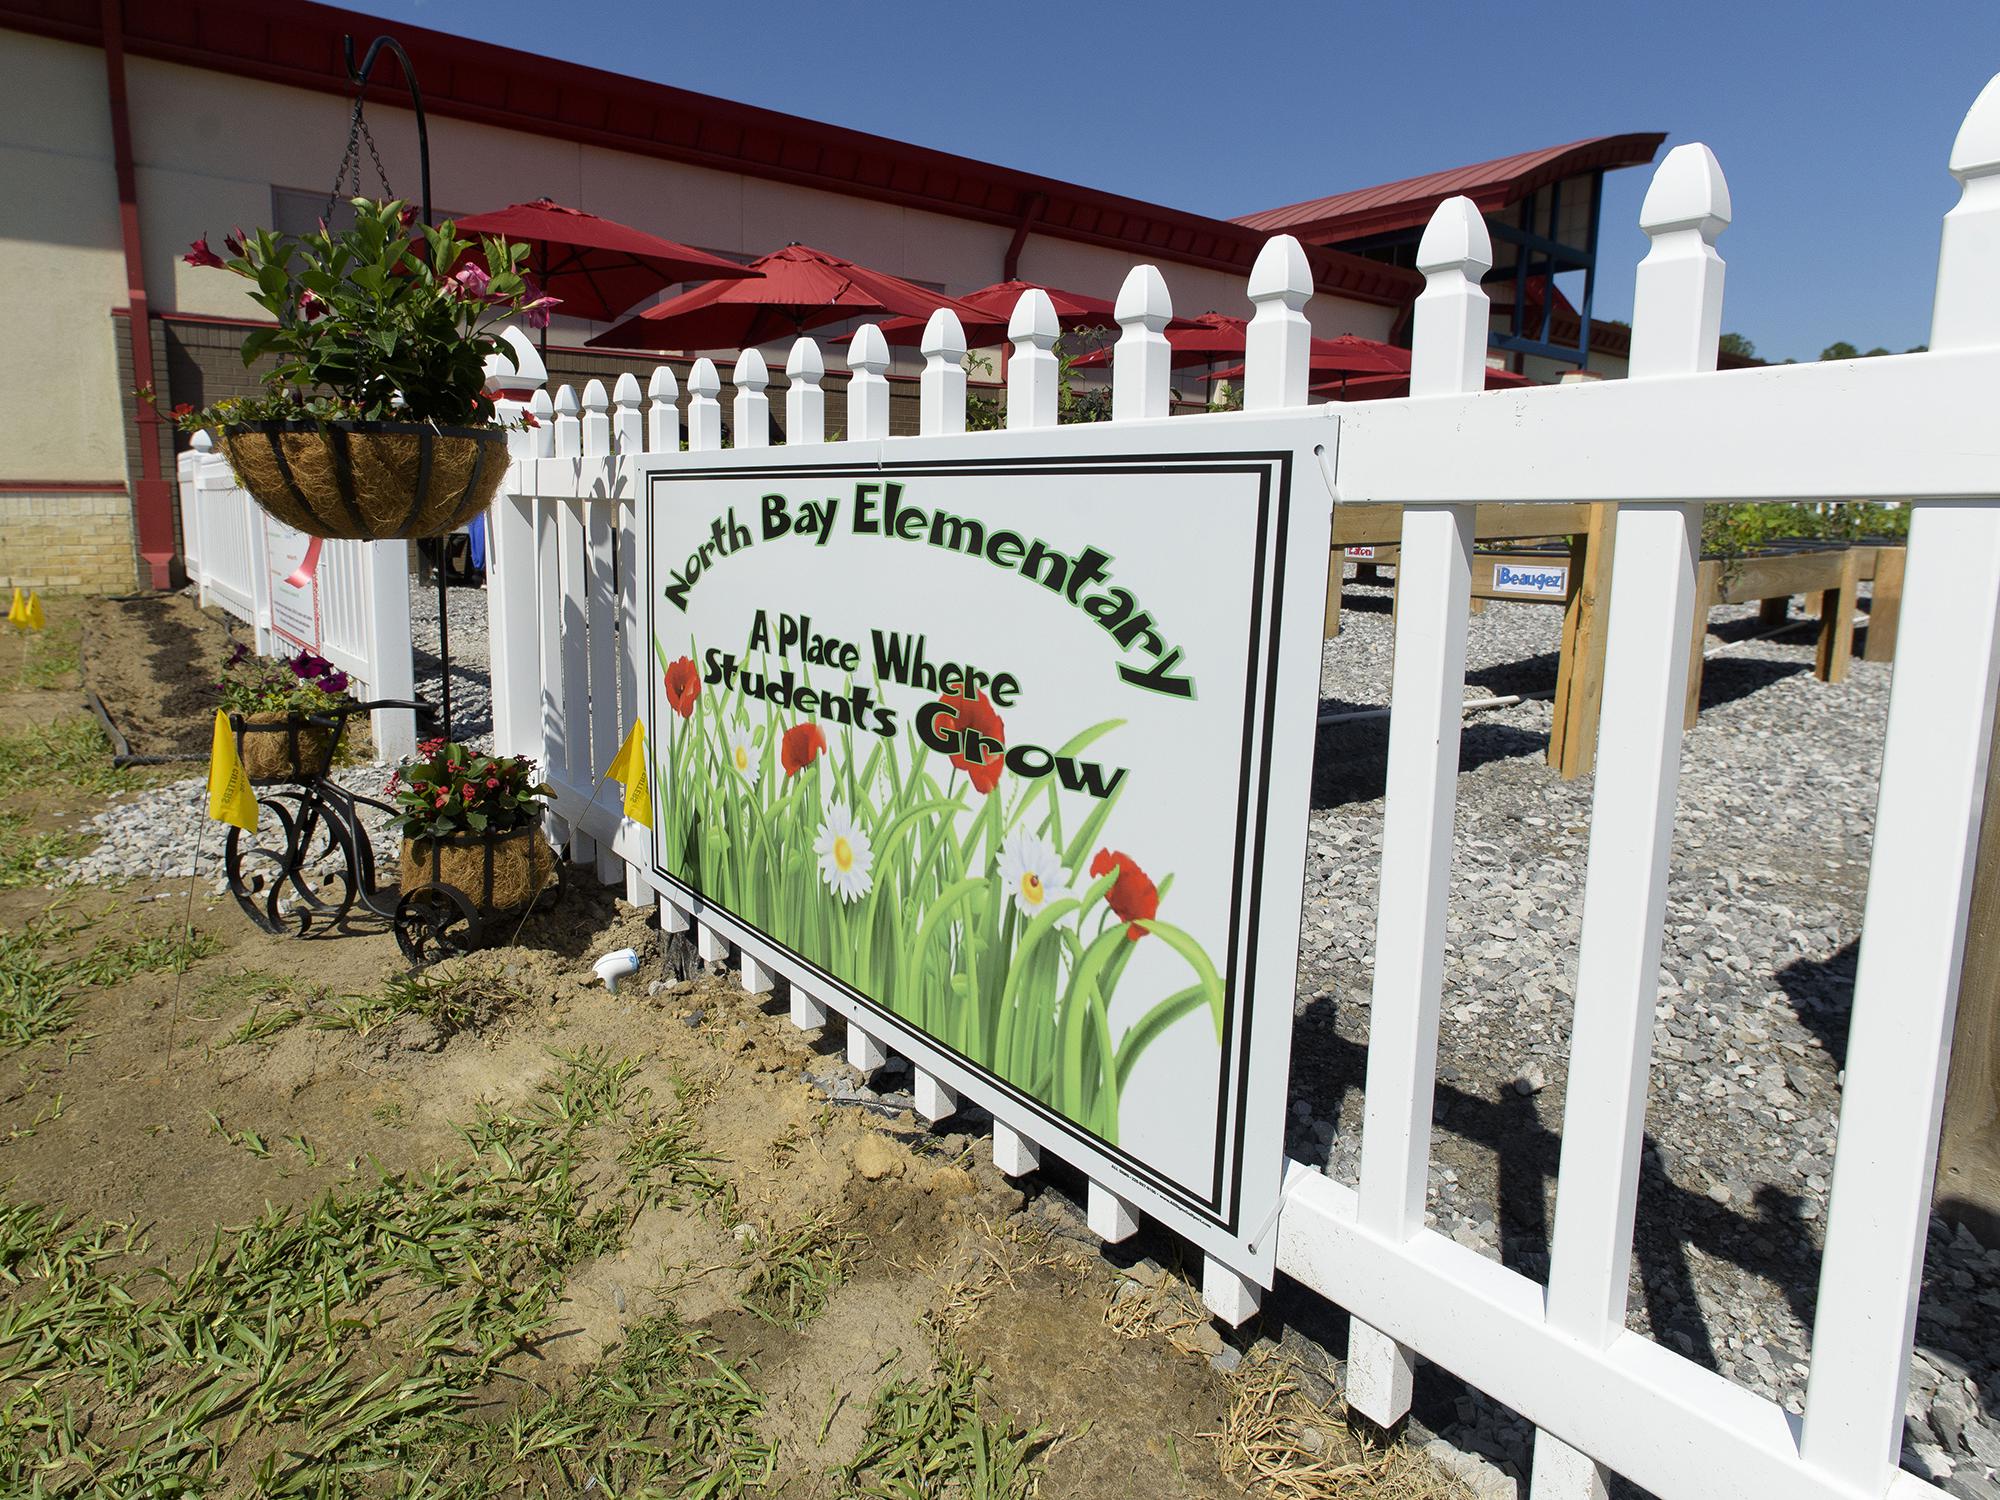 Colorful flowers are planted next to a sign at the entrance of the North Bay Elementary School garden.